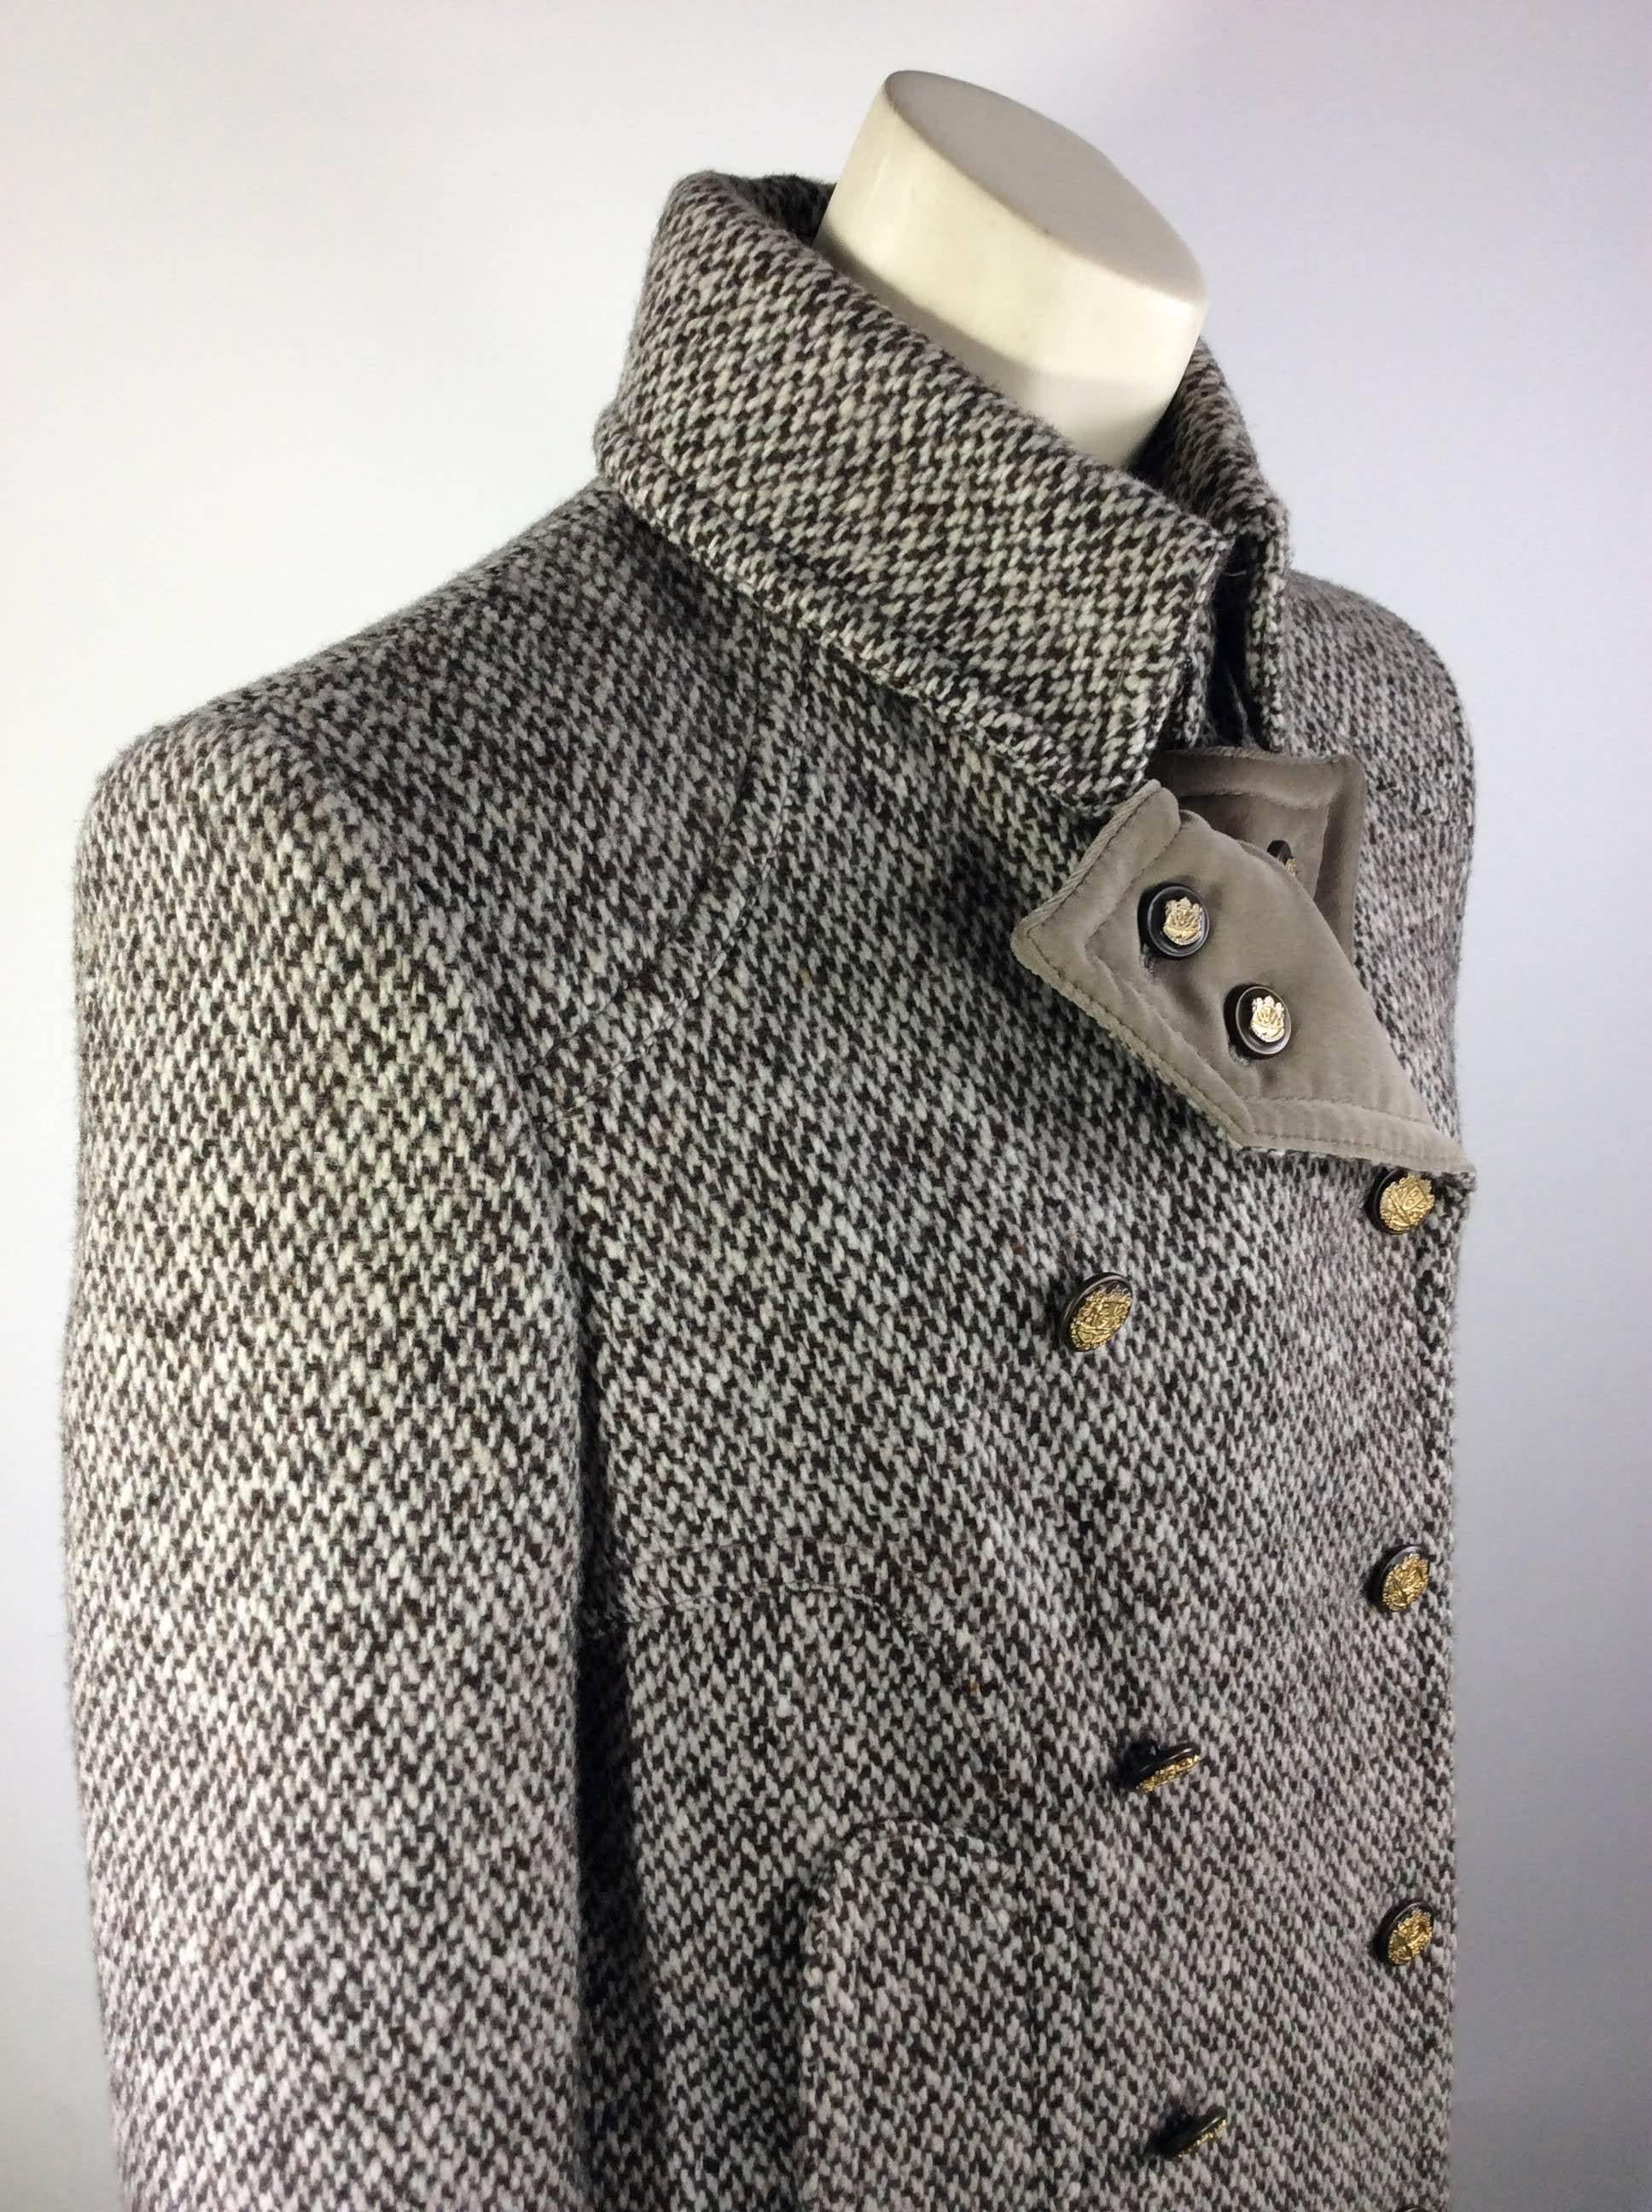 Tweed Military Style Jacket
Velvet on Cuffs and Collar Lining
Goldtone Logo Buttons 
Cheetah Print Interior 
Single Pocket on Either Side 